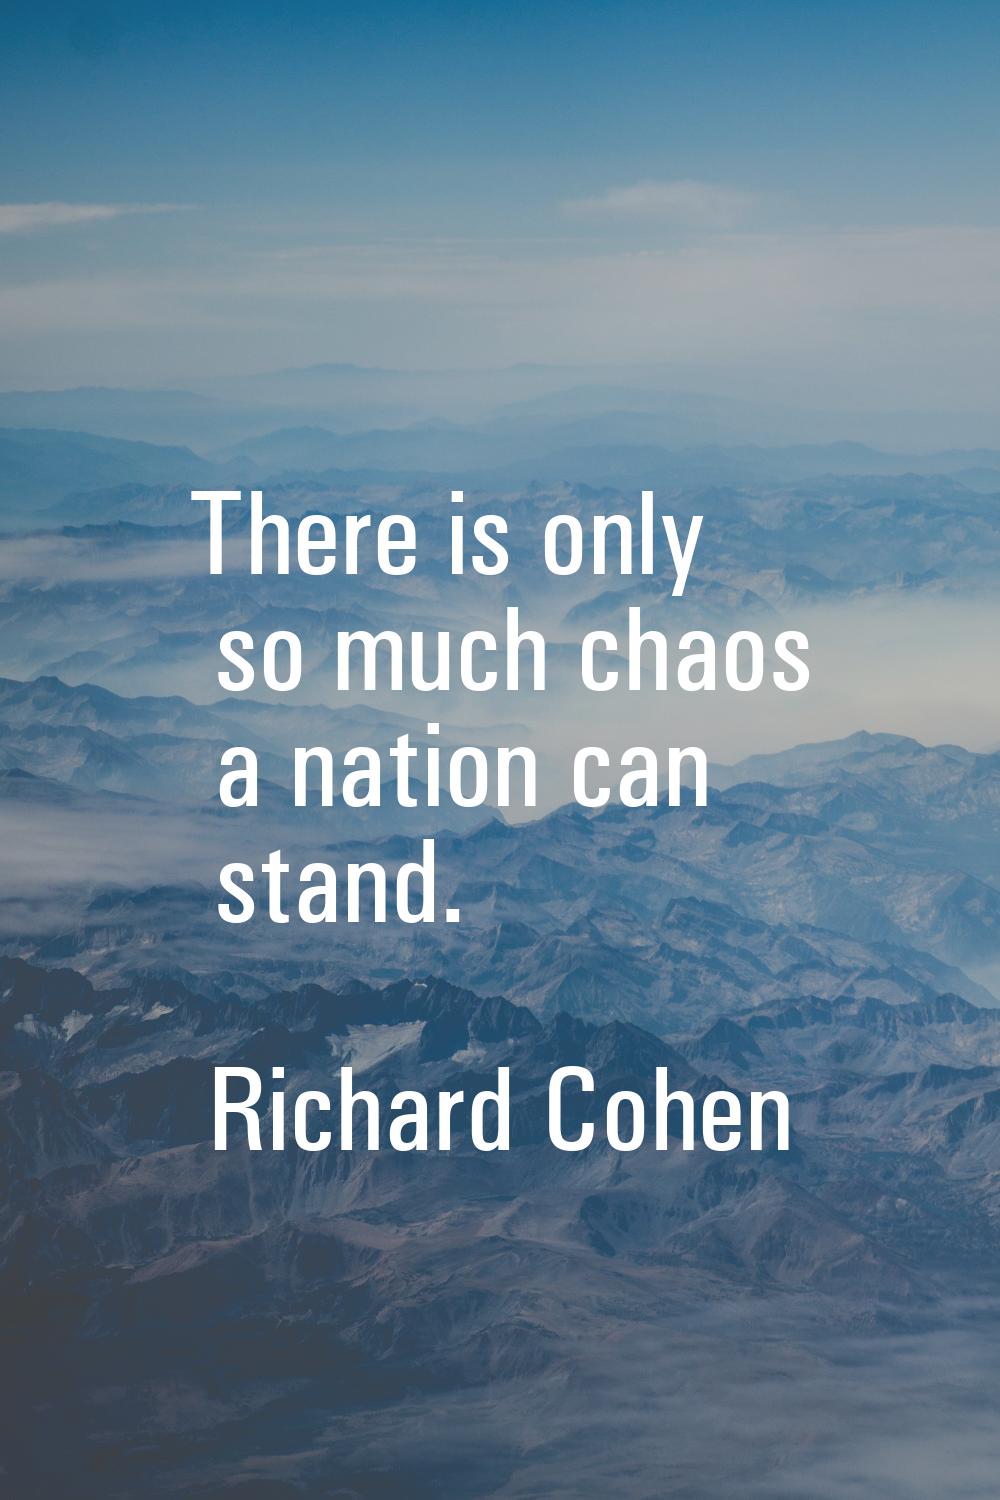 There is only so much chaos a nation can stand.